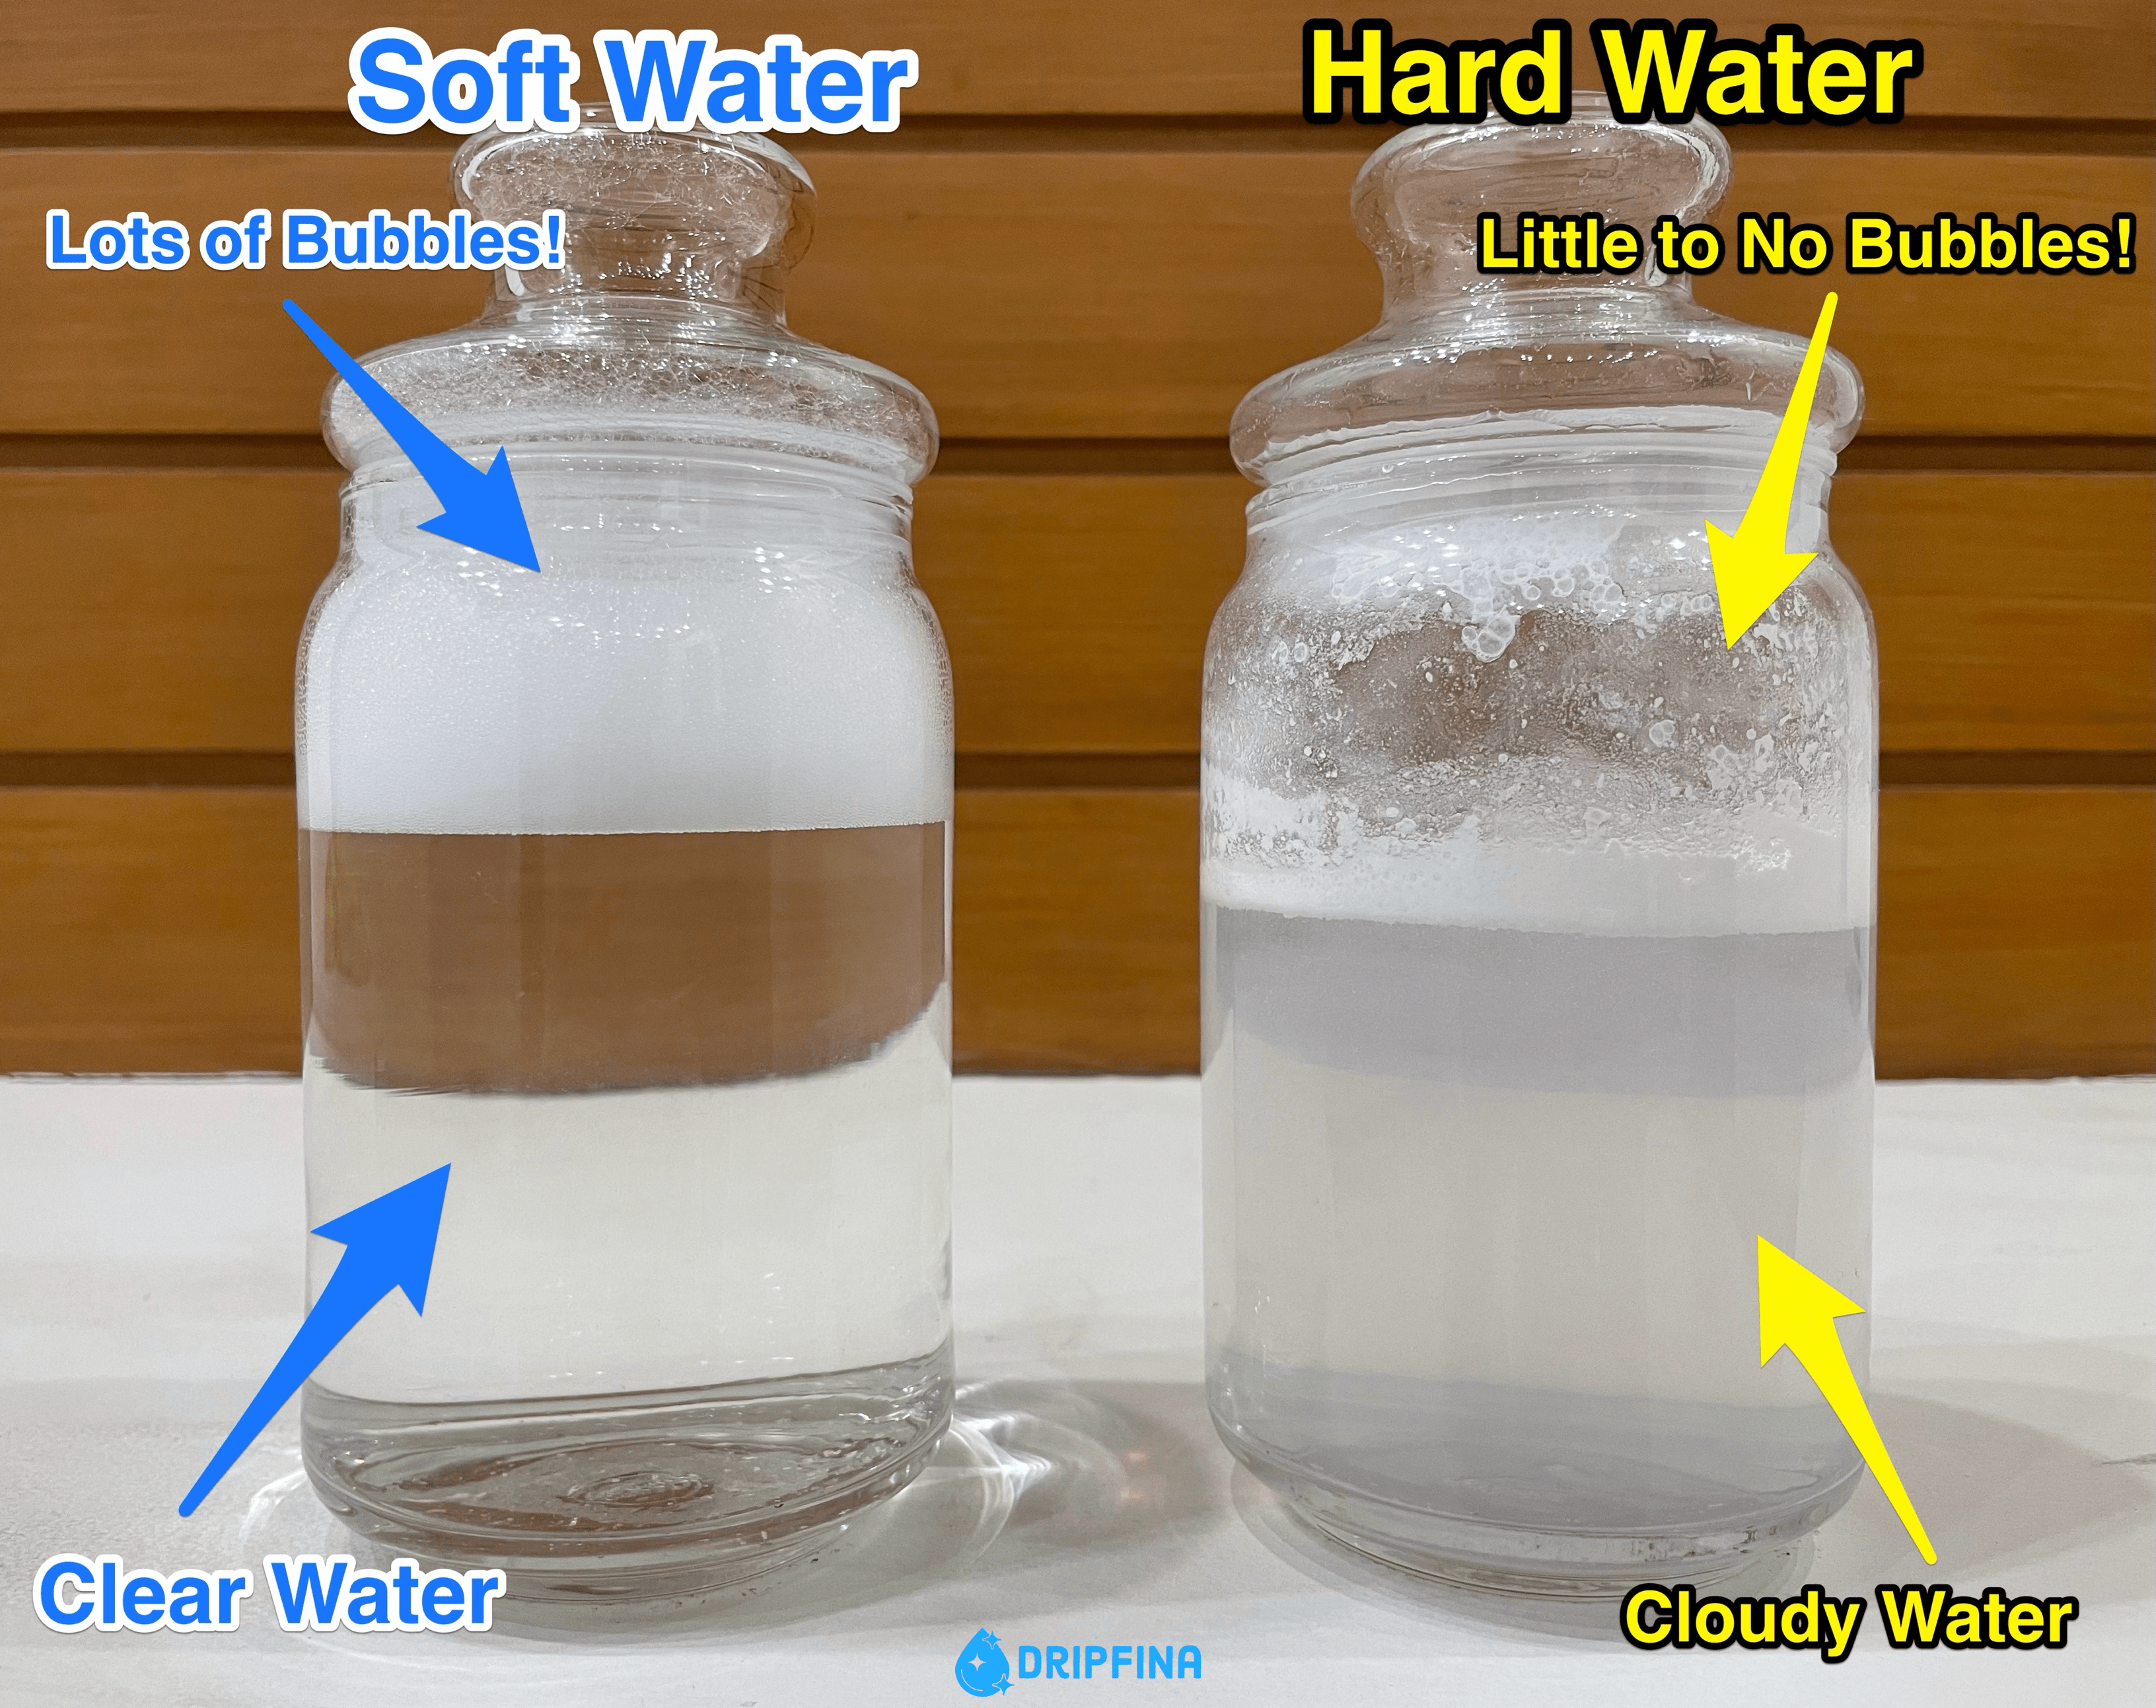 Difference Between Hard Water and Soft Water in Soap Suds Test